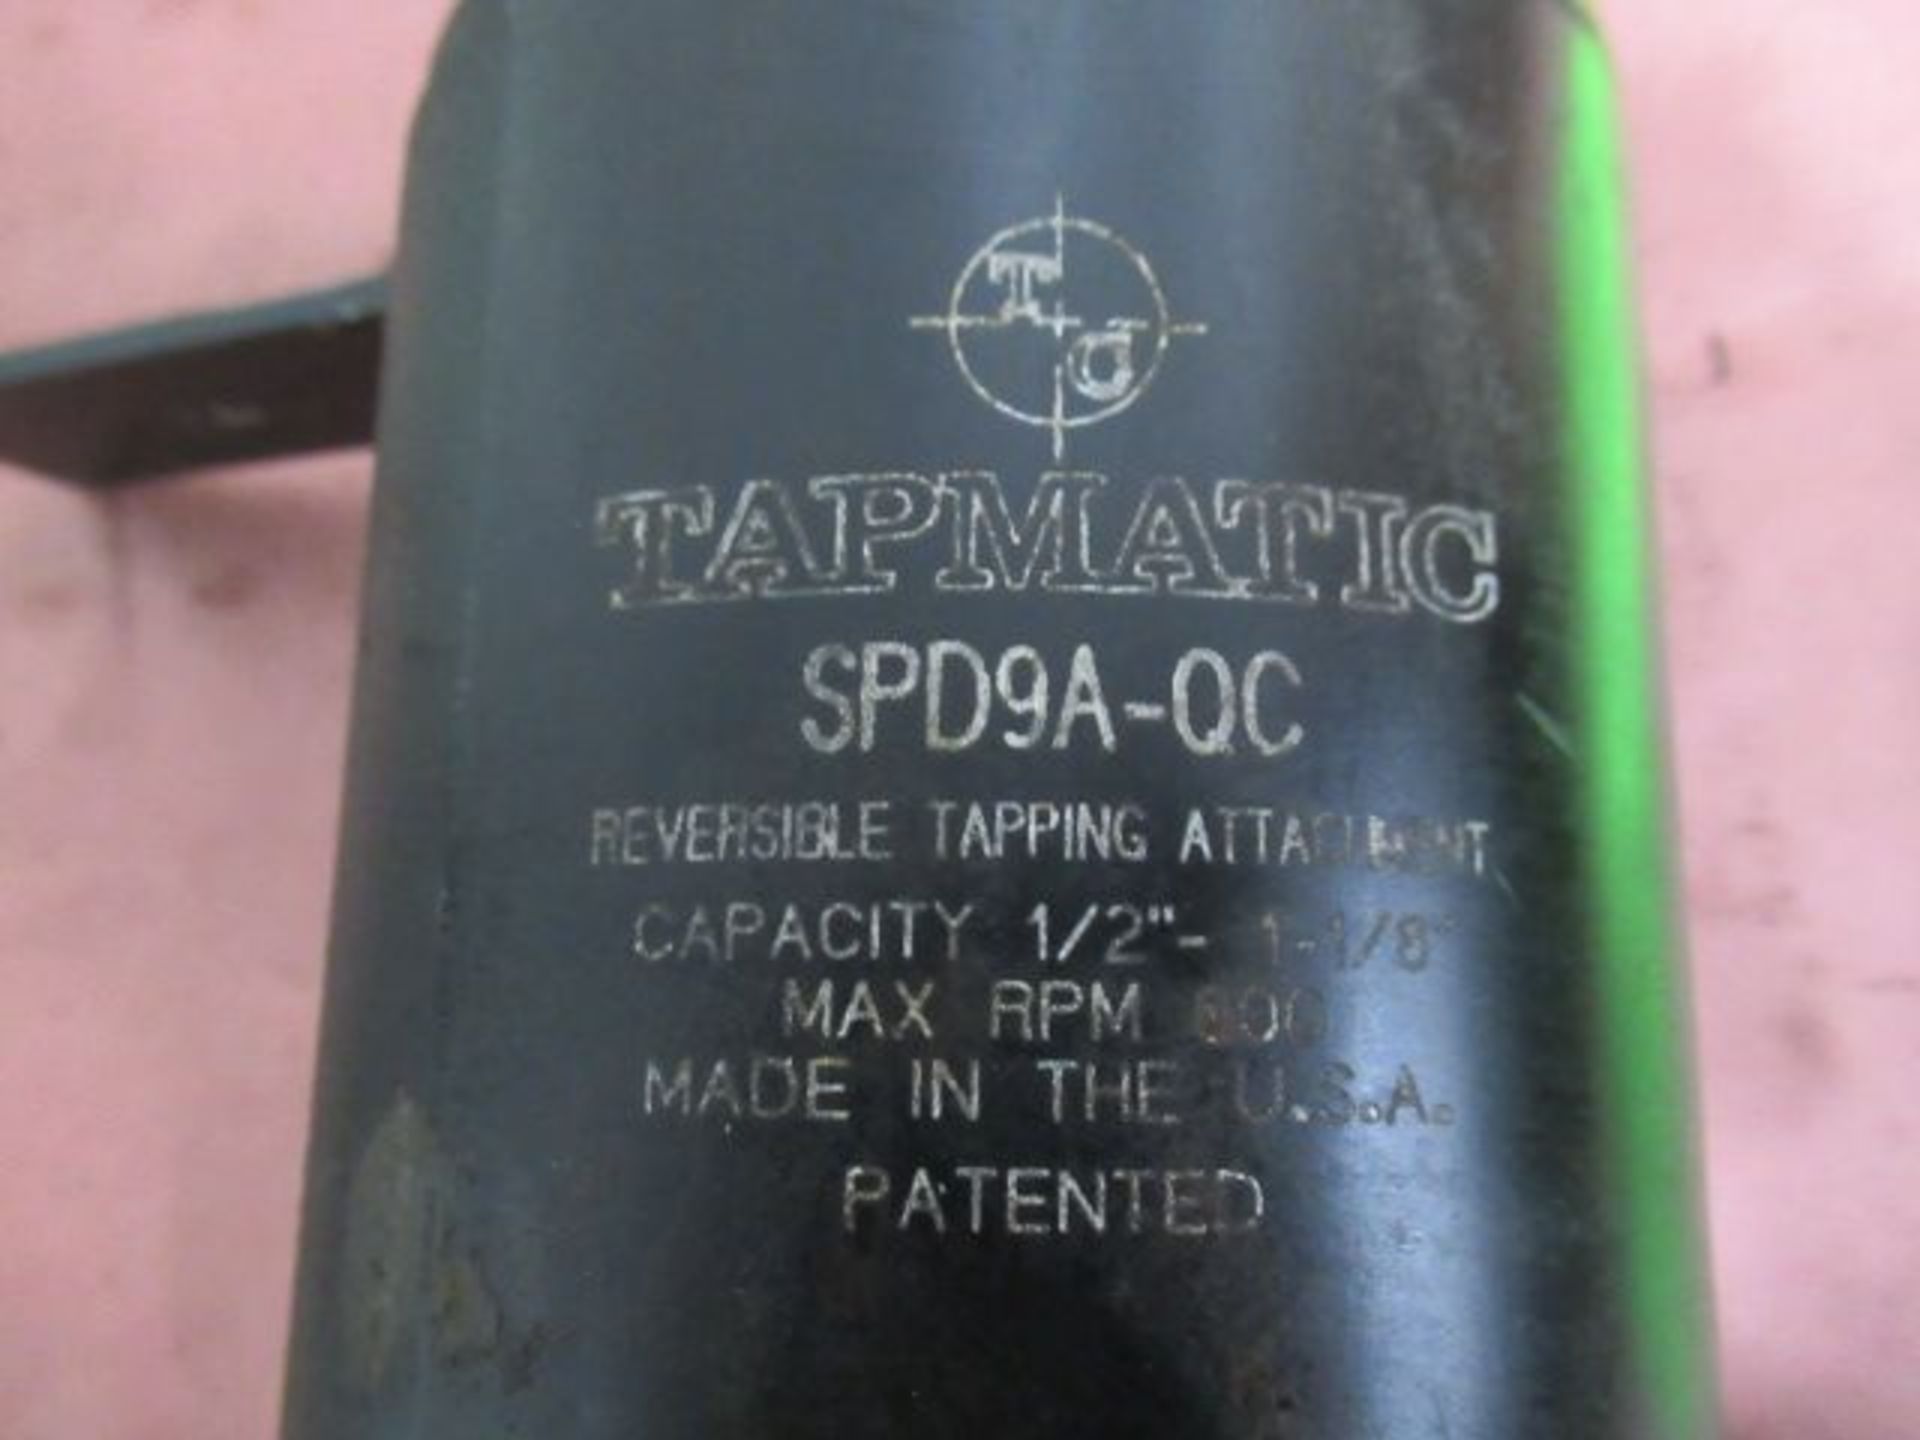 TAPMATIC Reservable Tapping Attachment Cap. 1/2-1 1/3, S/N SPD9A-OC ($50 Rigging Cost)